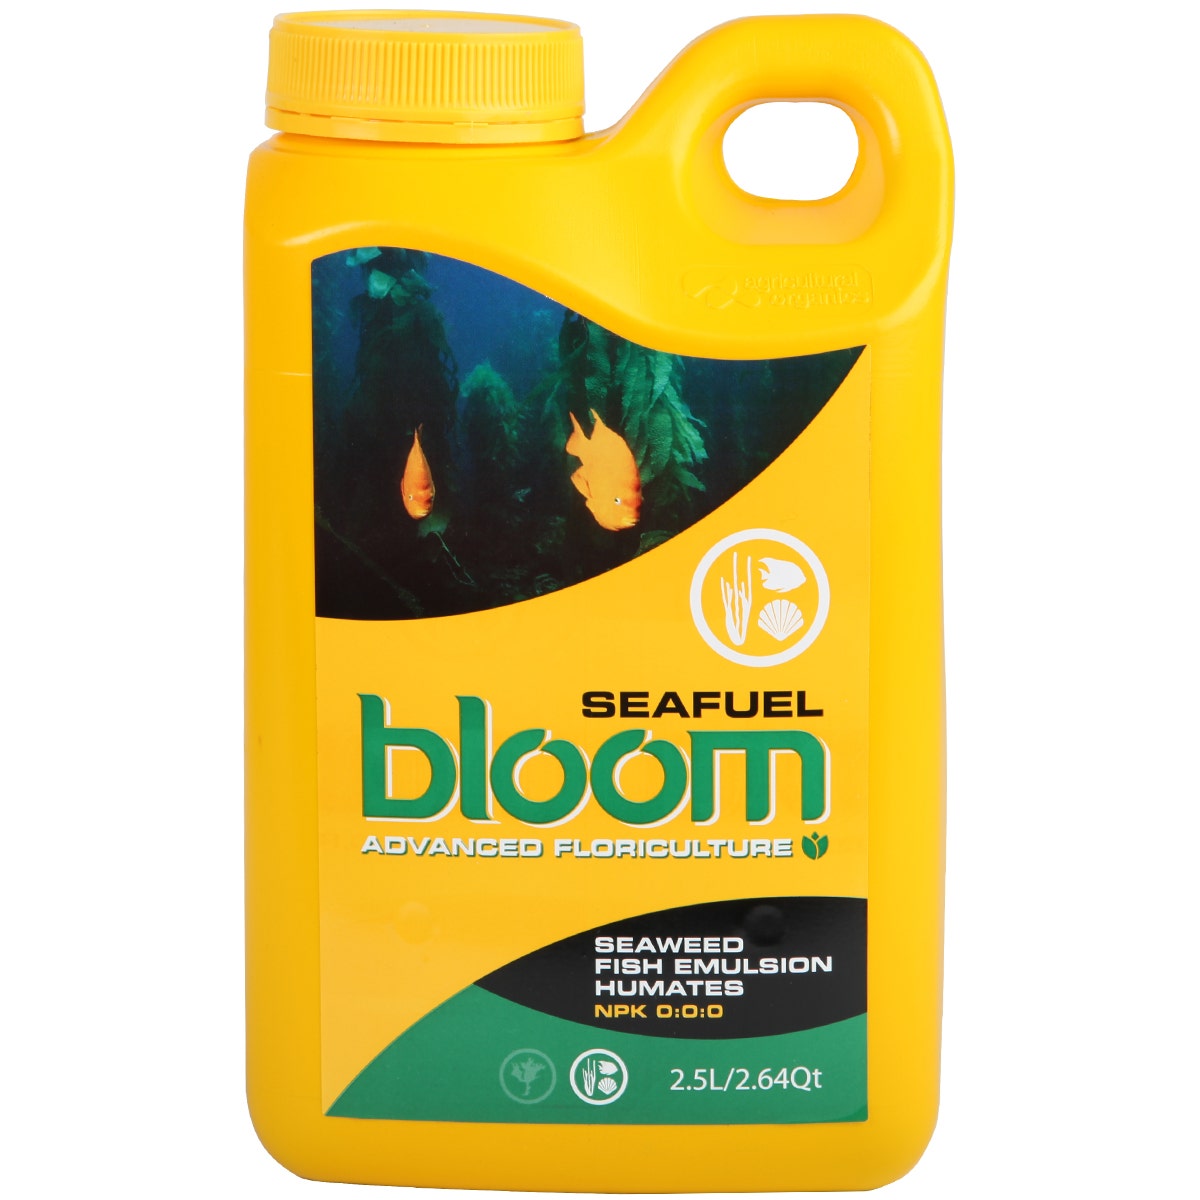 Bloom- SEAFUEL - Super Concentrate